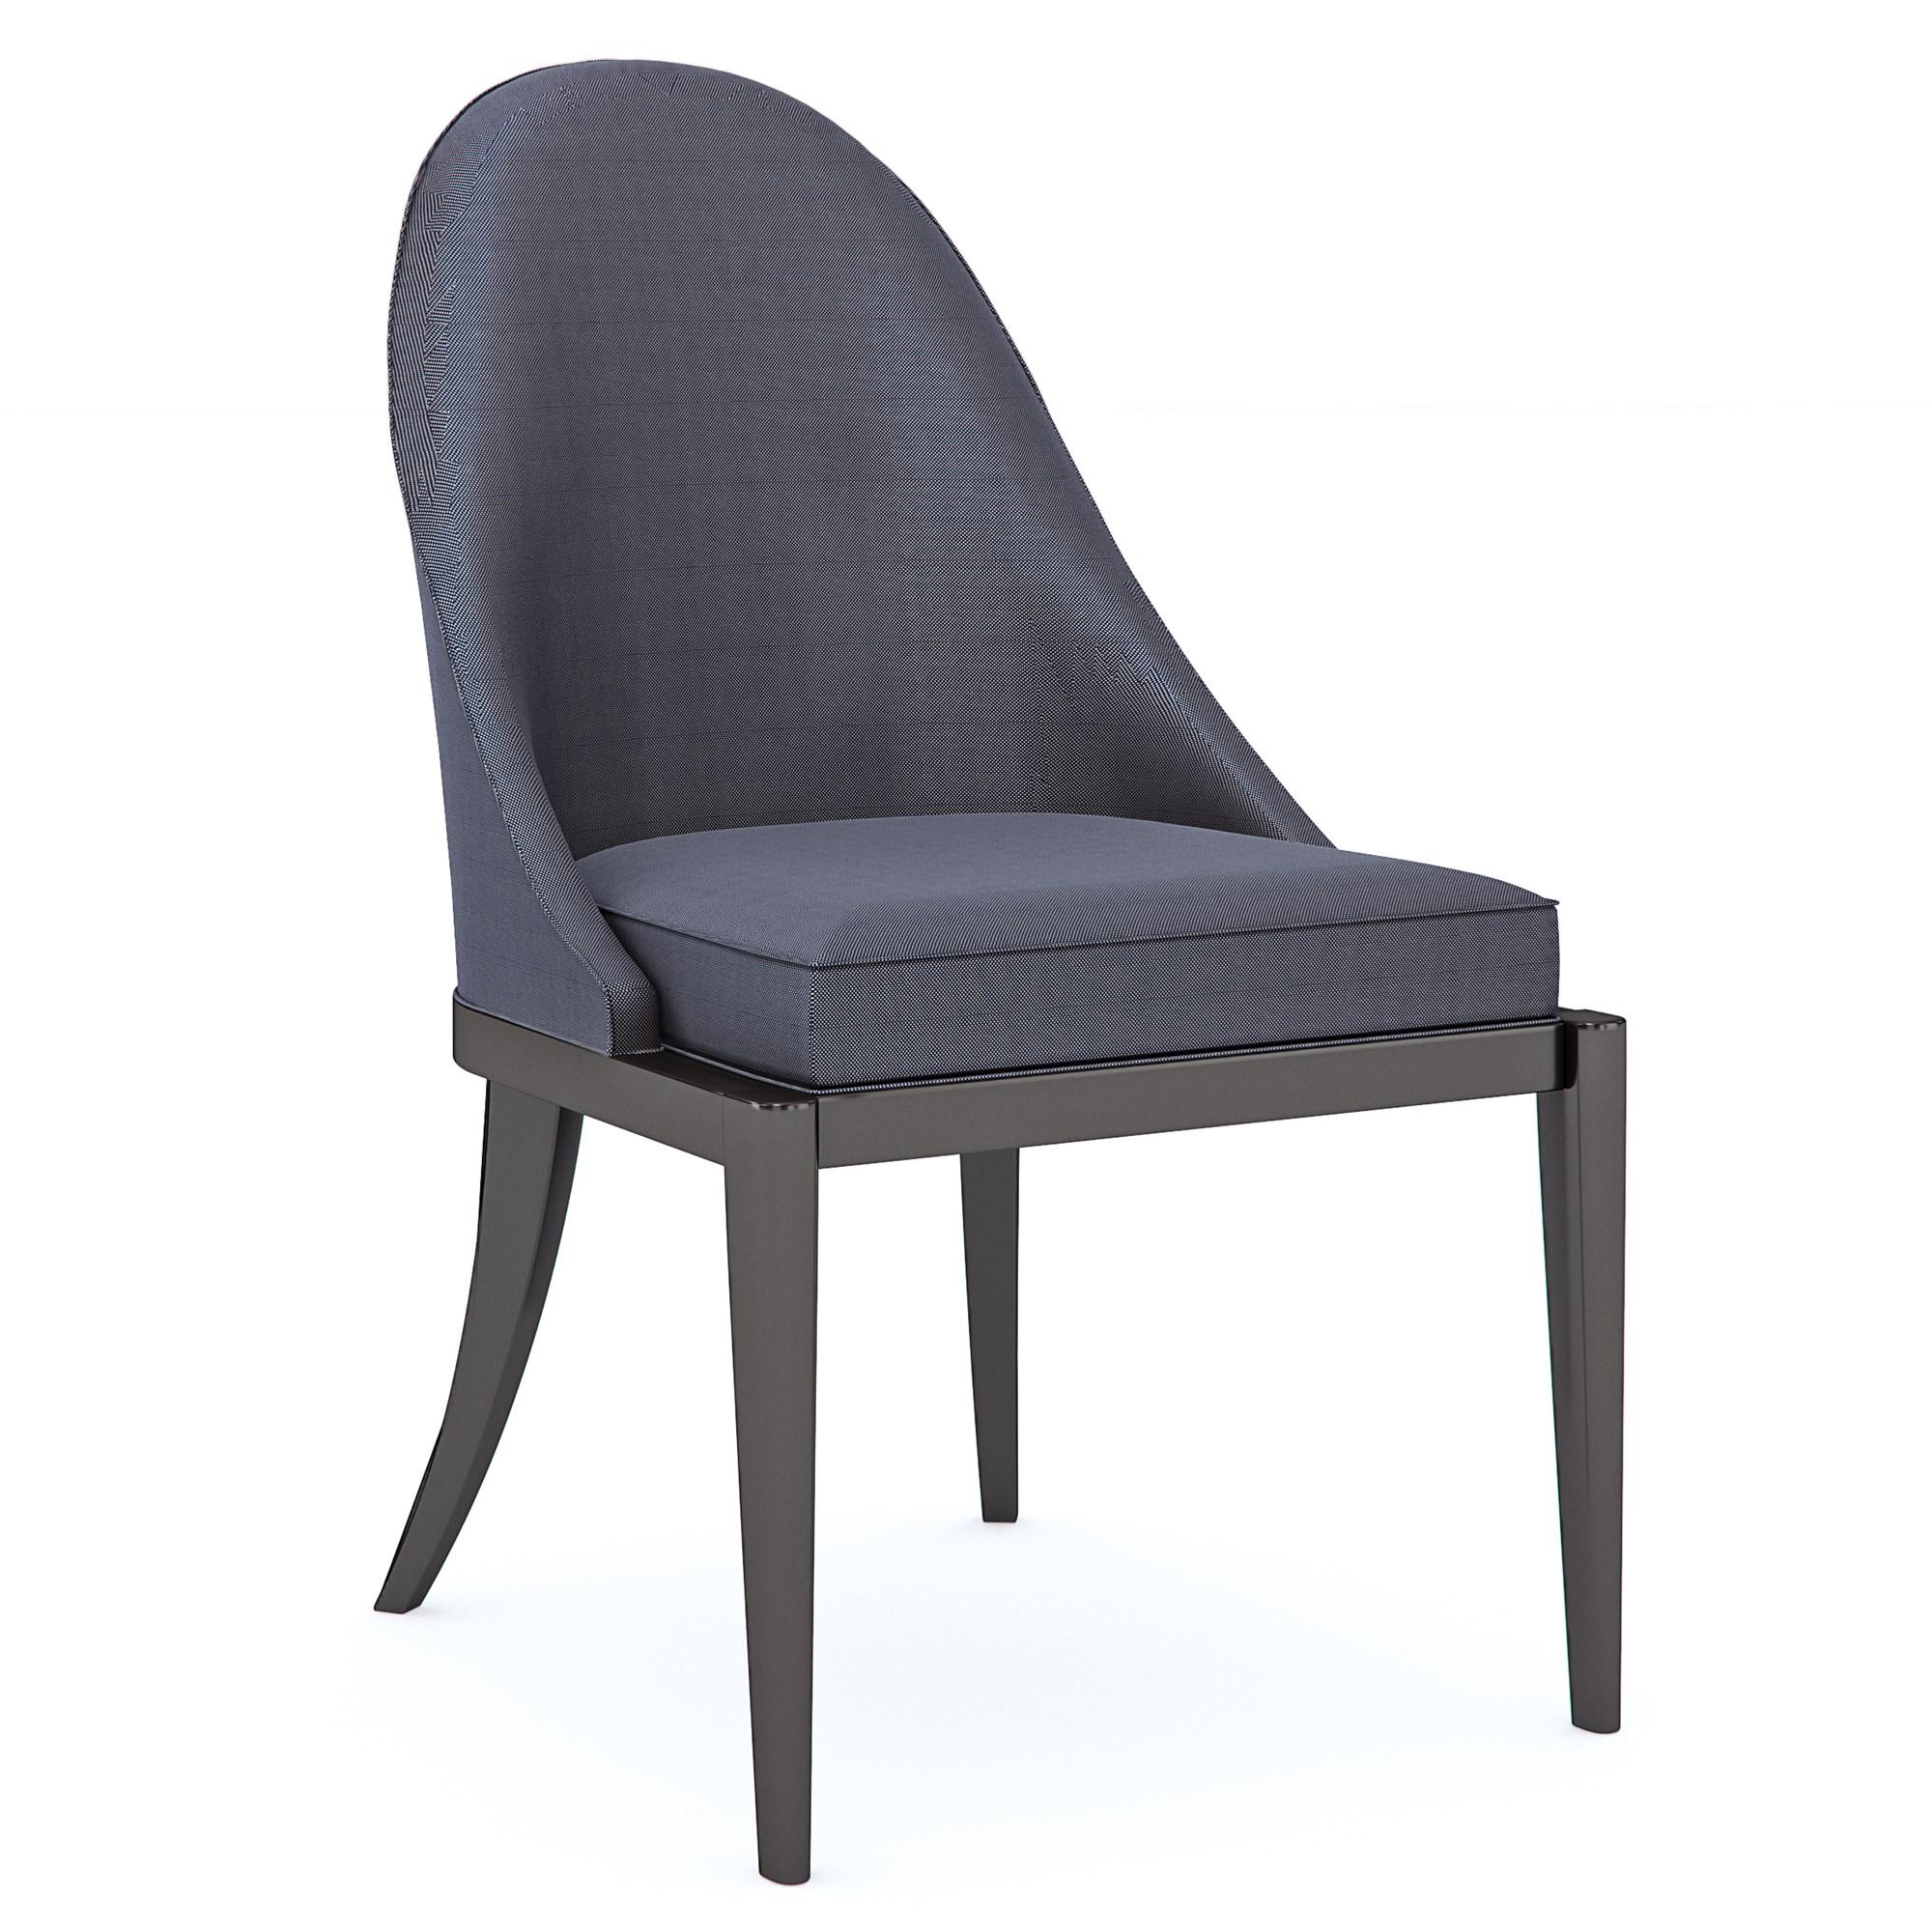 Contemporary Dining Chair Set NATURAL CHOICE SIDE CHAIR CLA-020-285-Set-2 in Navy, Dark Walnut Fabric